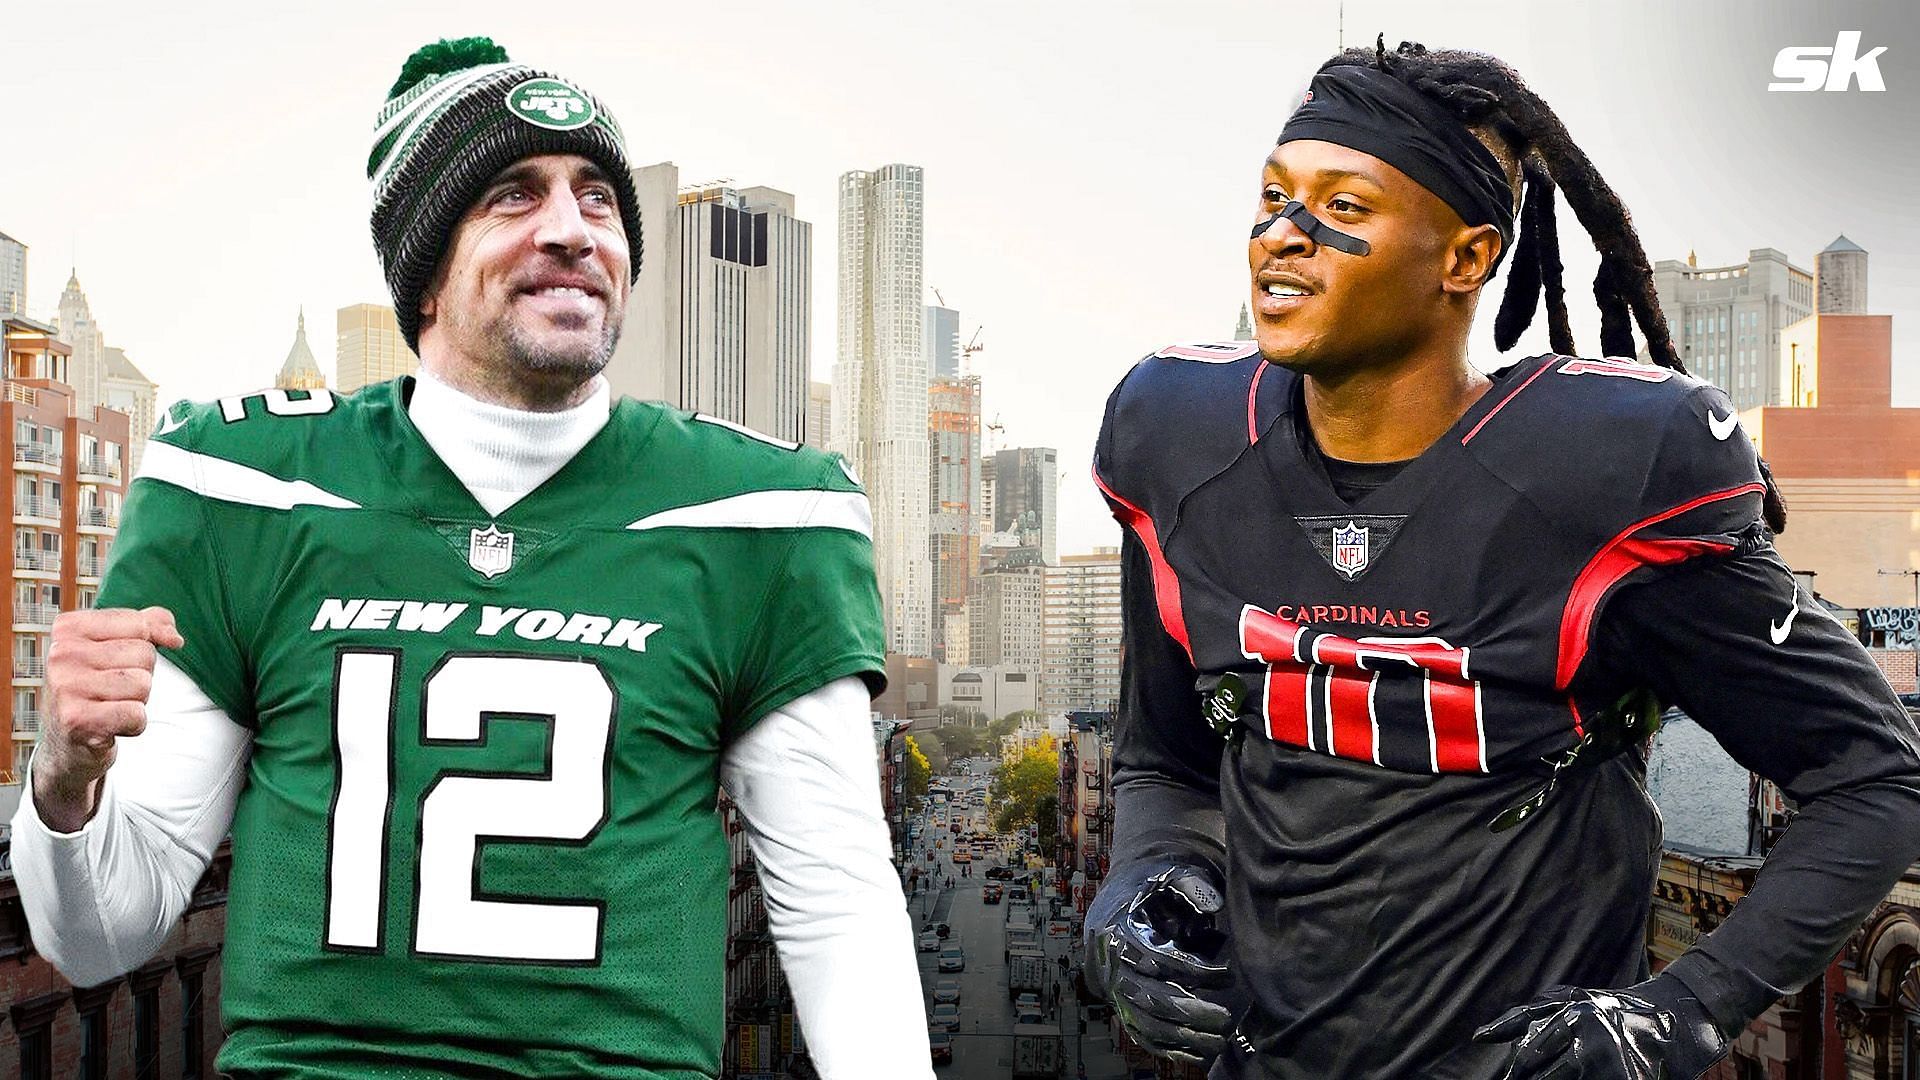 Will DeAndre Hopkins sign with the New York Jets and play for Aaron Rodgers?